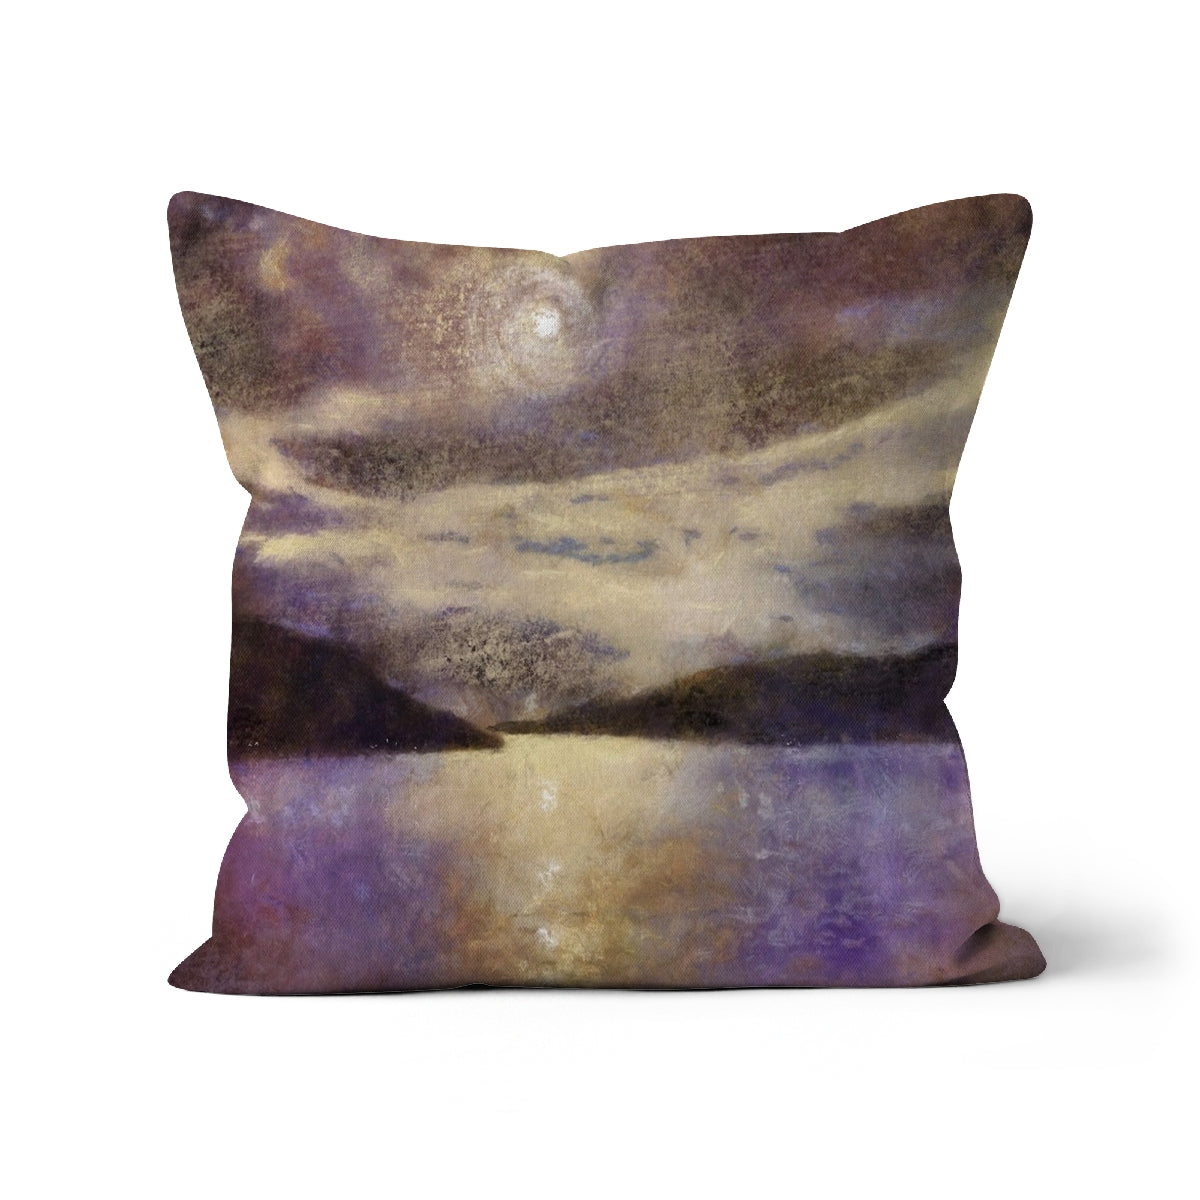 Moonlight Meets Lewis & Harris Art Gifts Cushion-Cushions-Hebridean Islands Art Gallery-Canvas-16"x16"-Paintings, Prints, Homeware, Art Gifts From Scotland By Scottish Artist Kevin Hunter